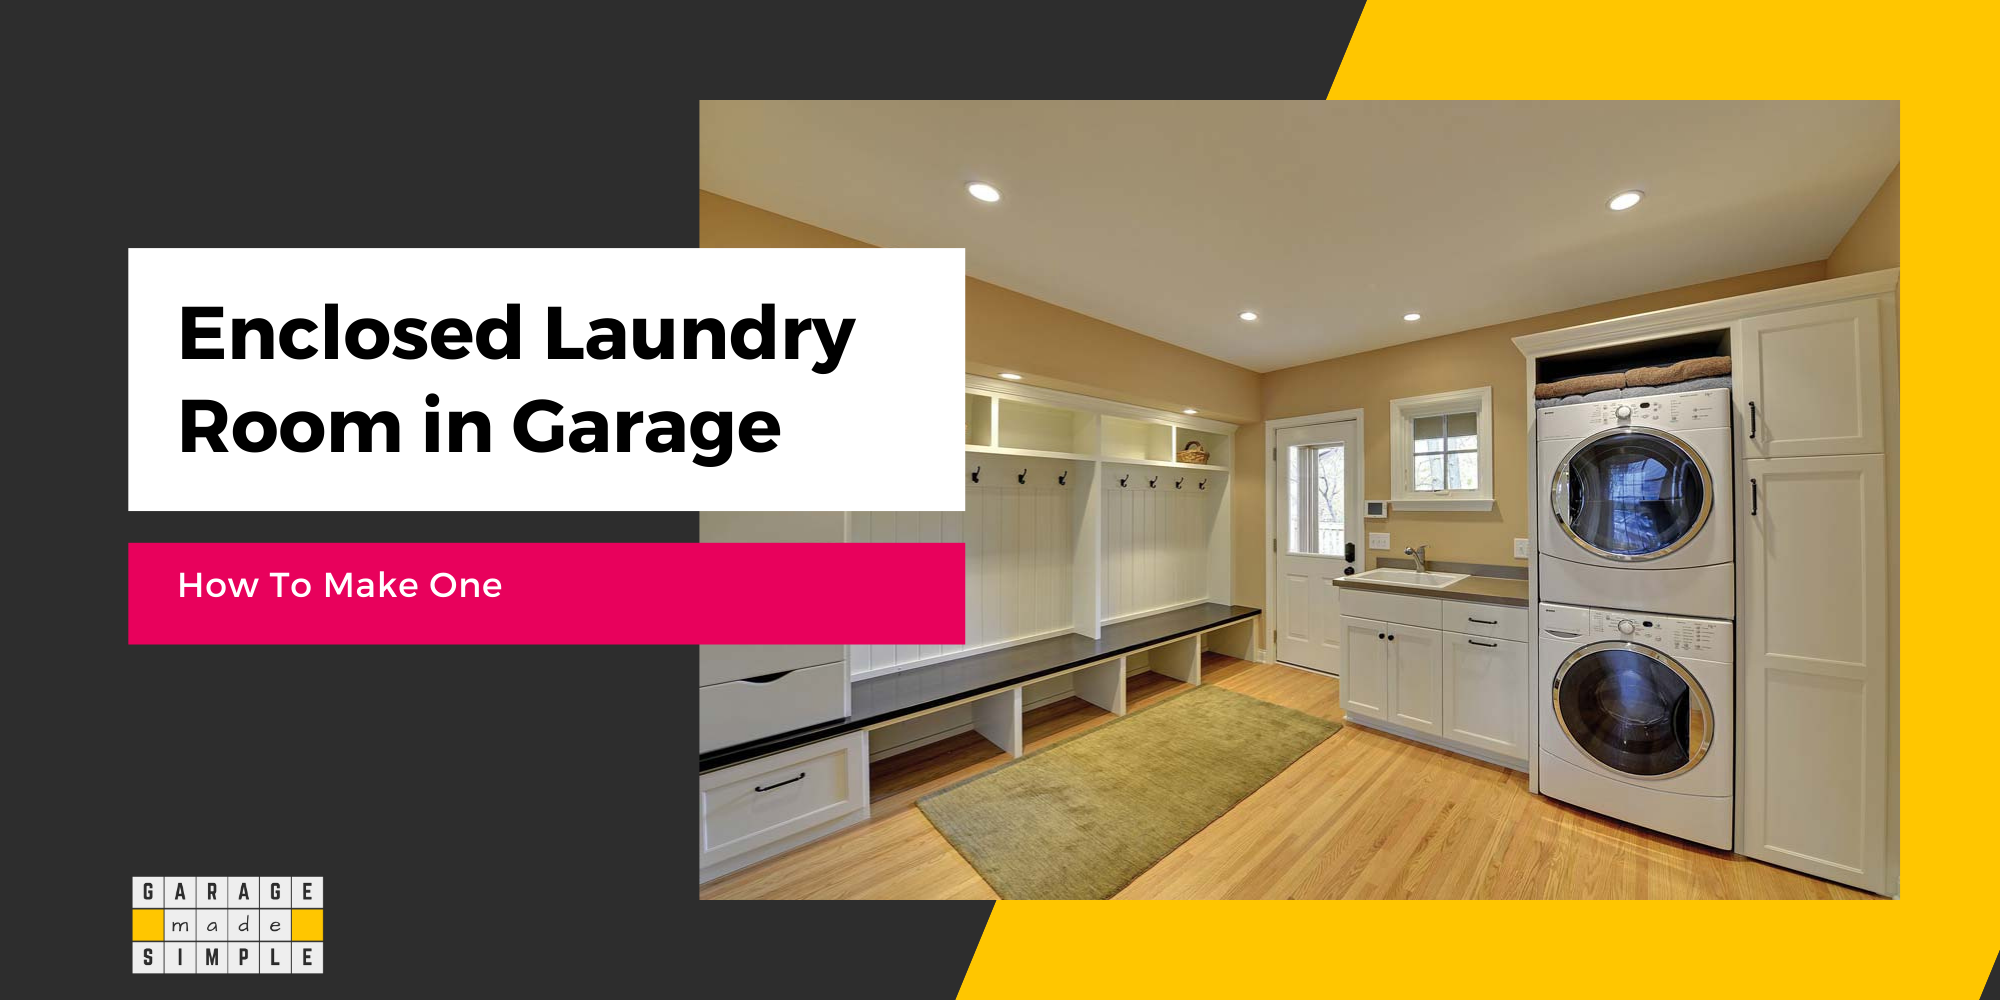 How to Make an Enclosed Laundry Room in a Garage